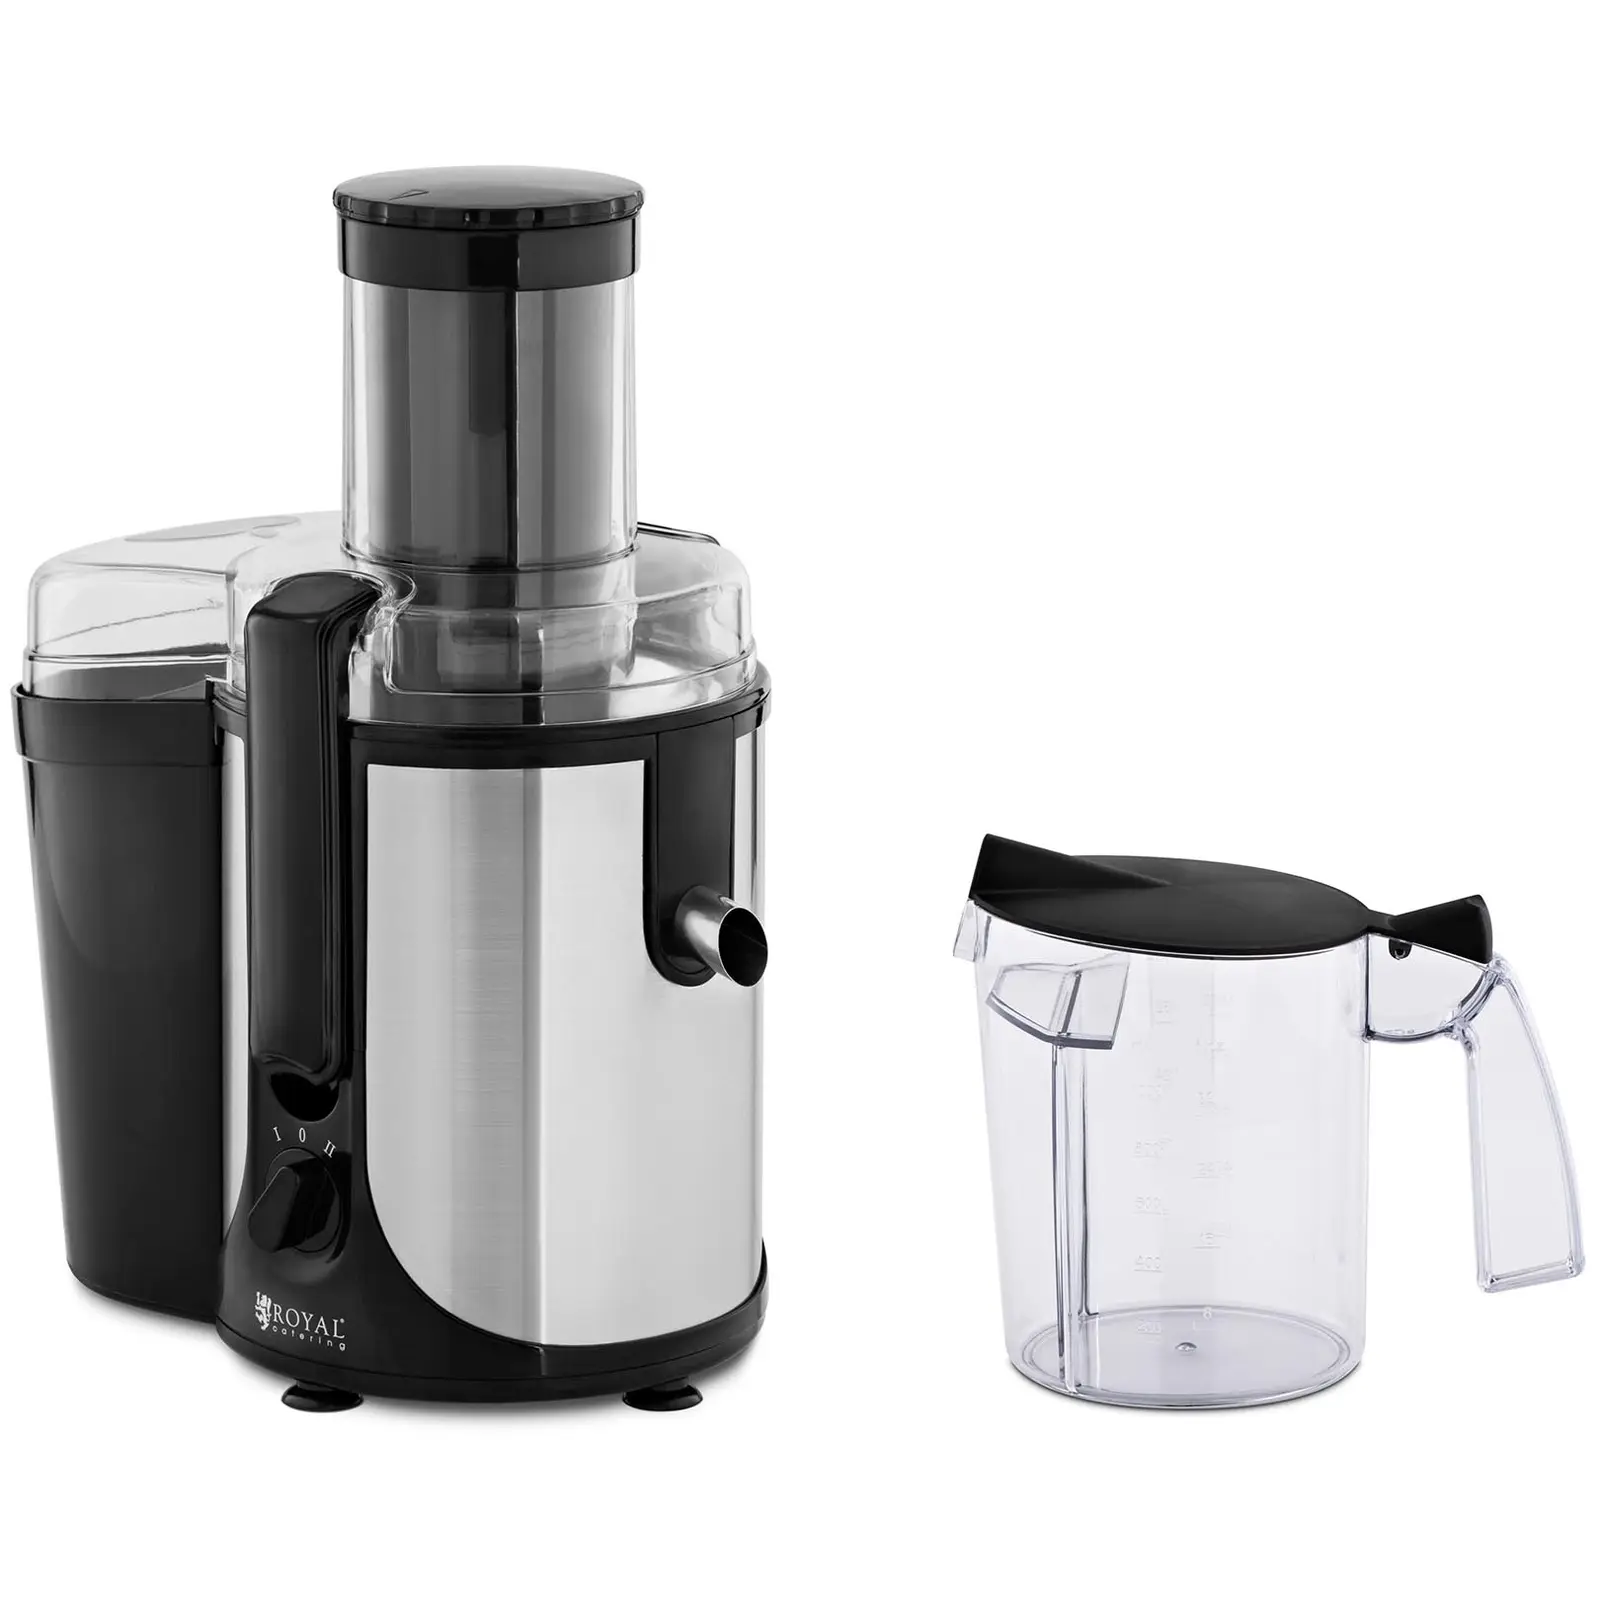 Juicer - 1,200 W - Royal Catering